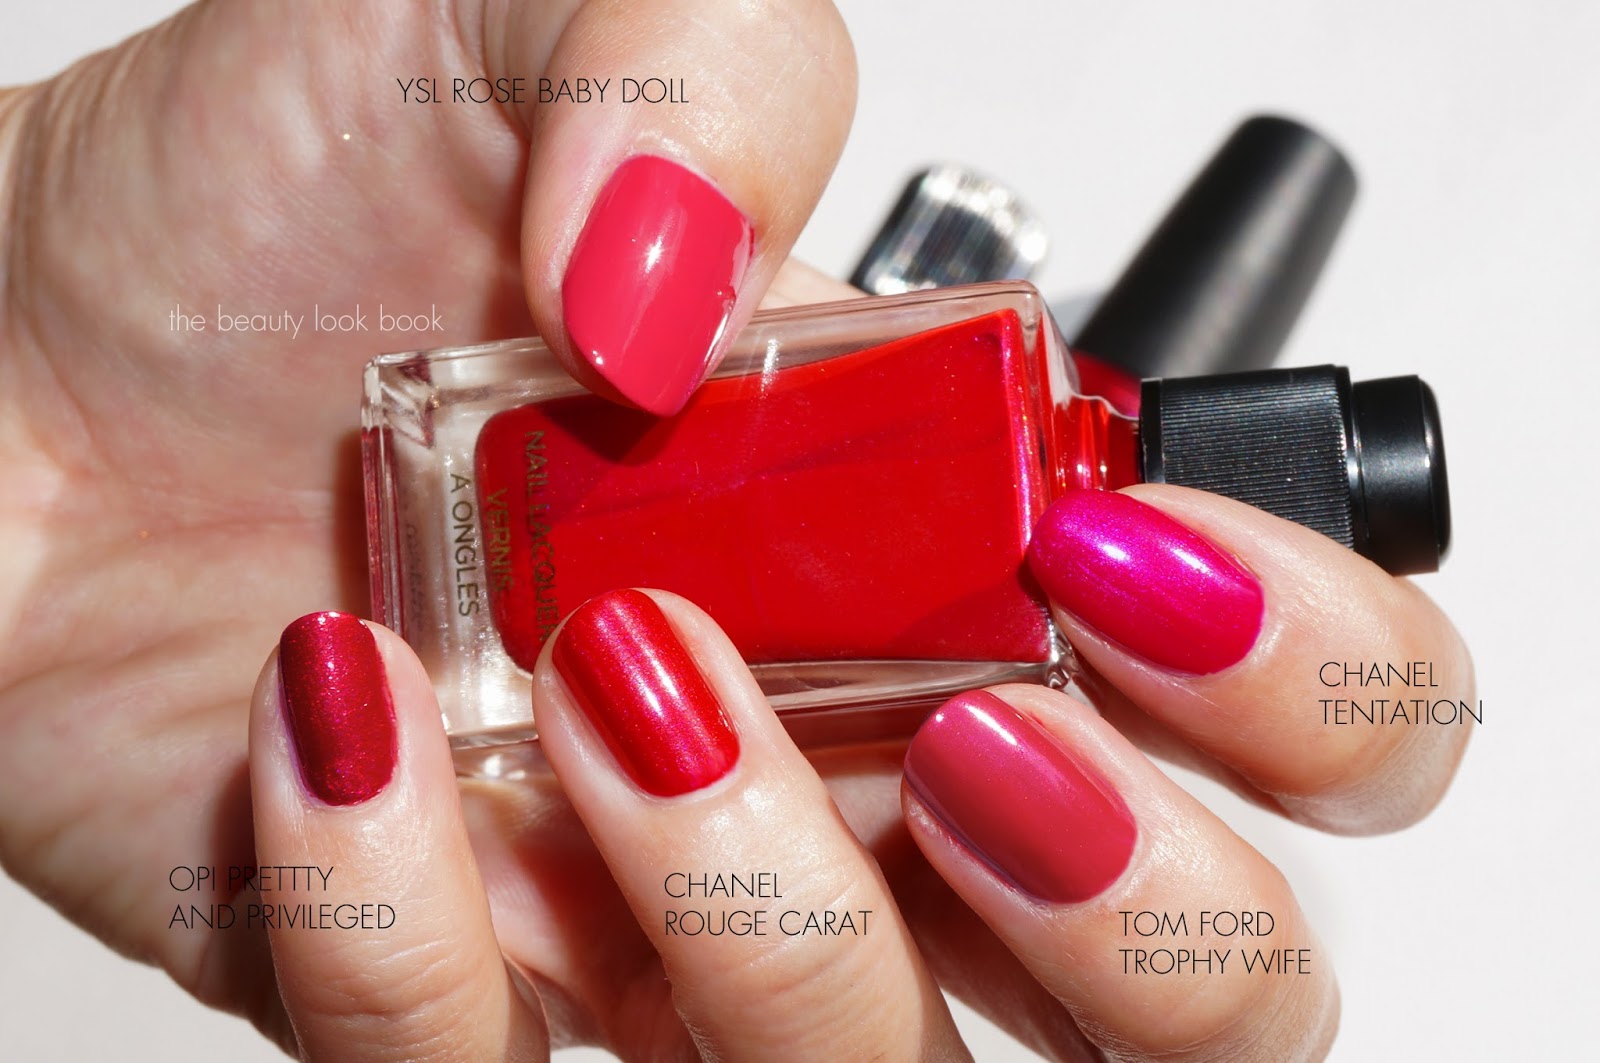 Tom Ford Trophy Wife Nail Lacquer Comparisons - The Beauty Look Book